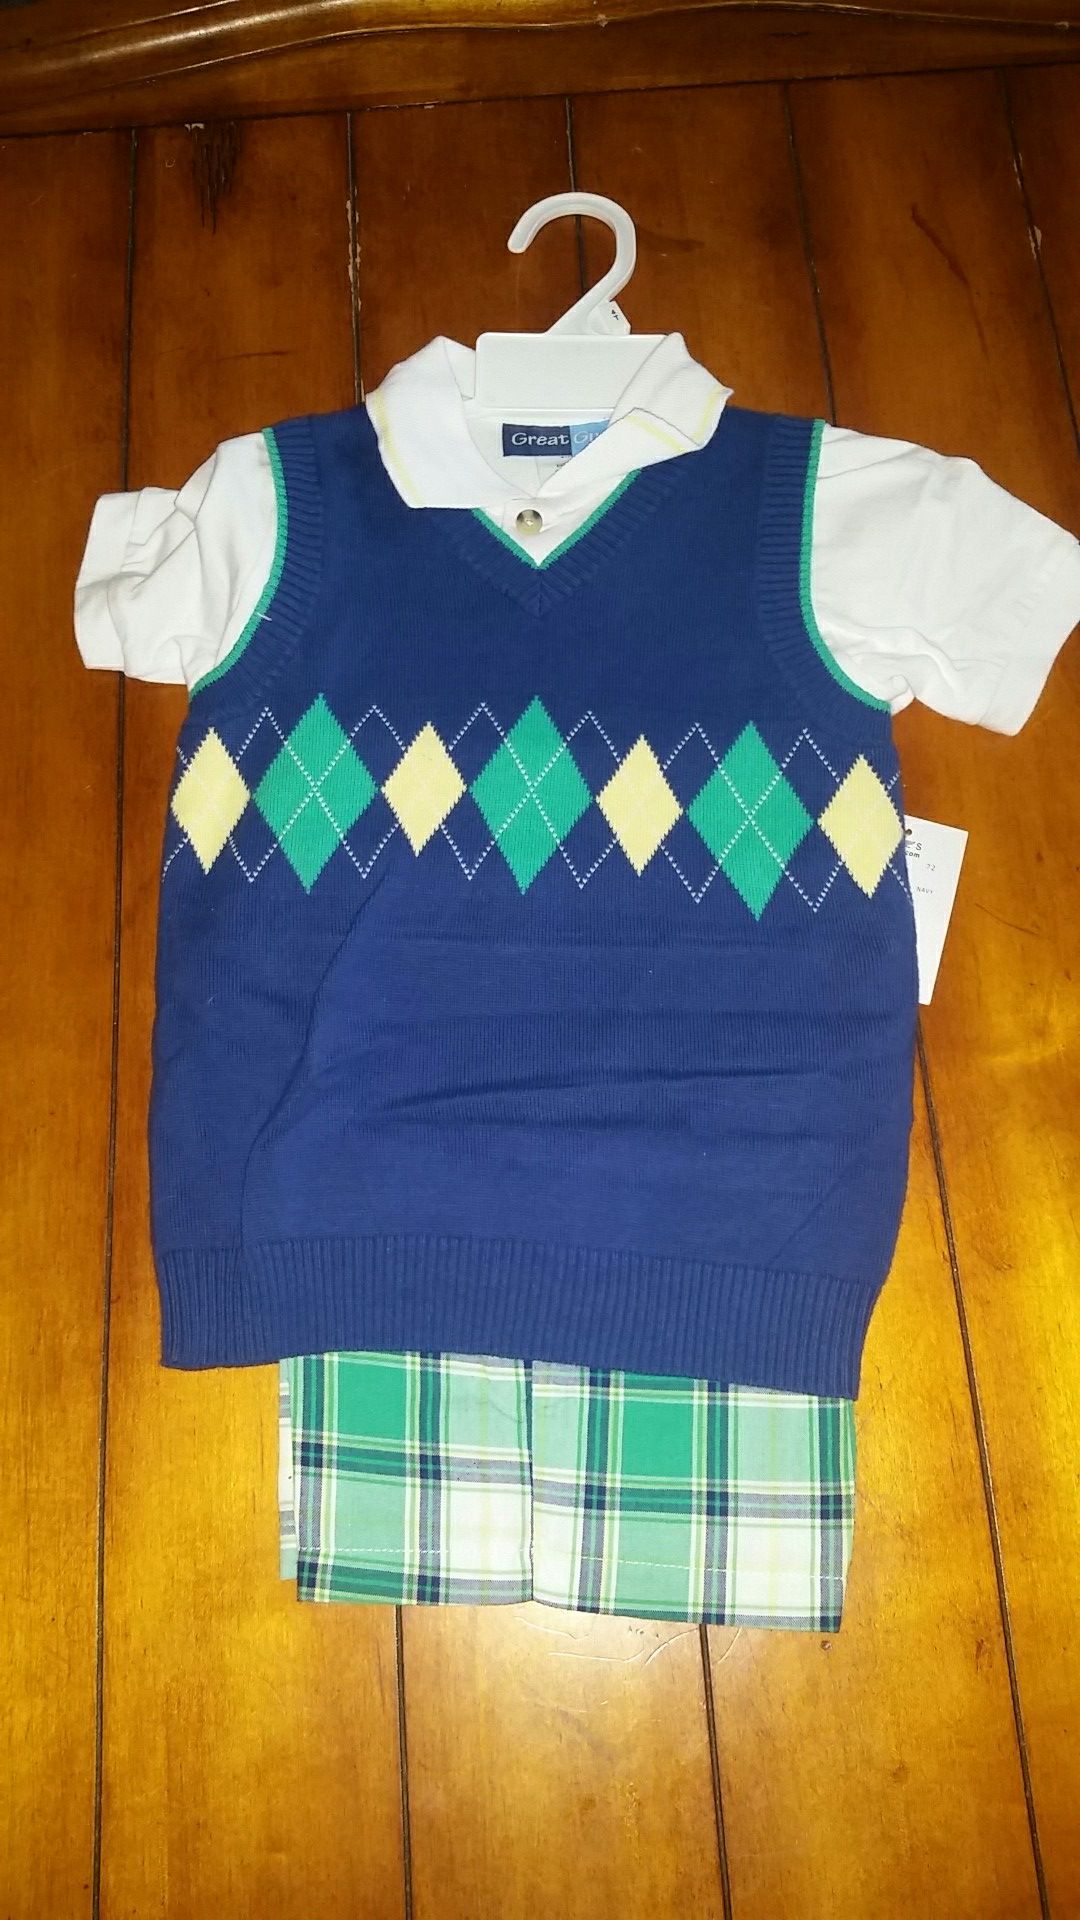 New Size 4T cute summer dress up outfit plaid shorts and argyle print sweater vest with Polo top underneath church wedding